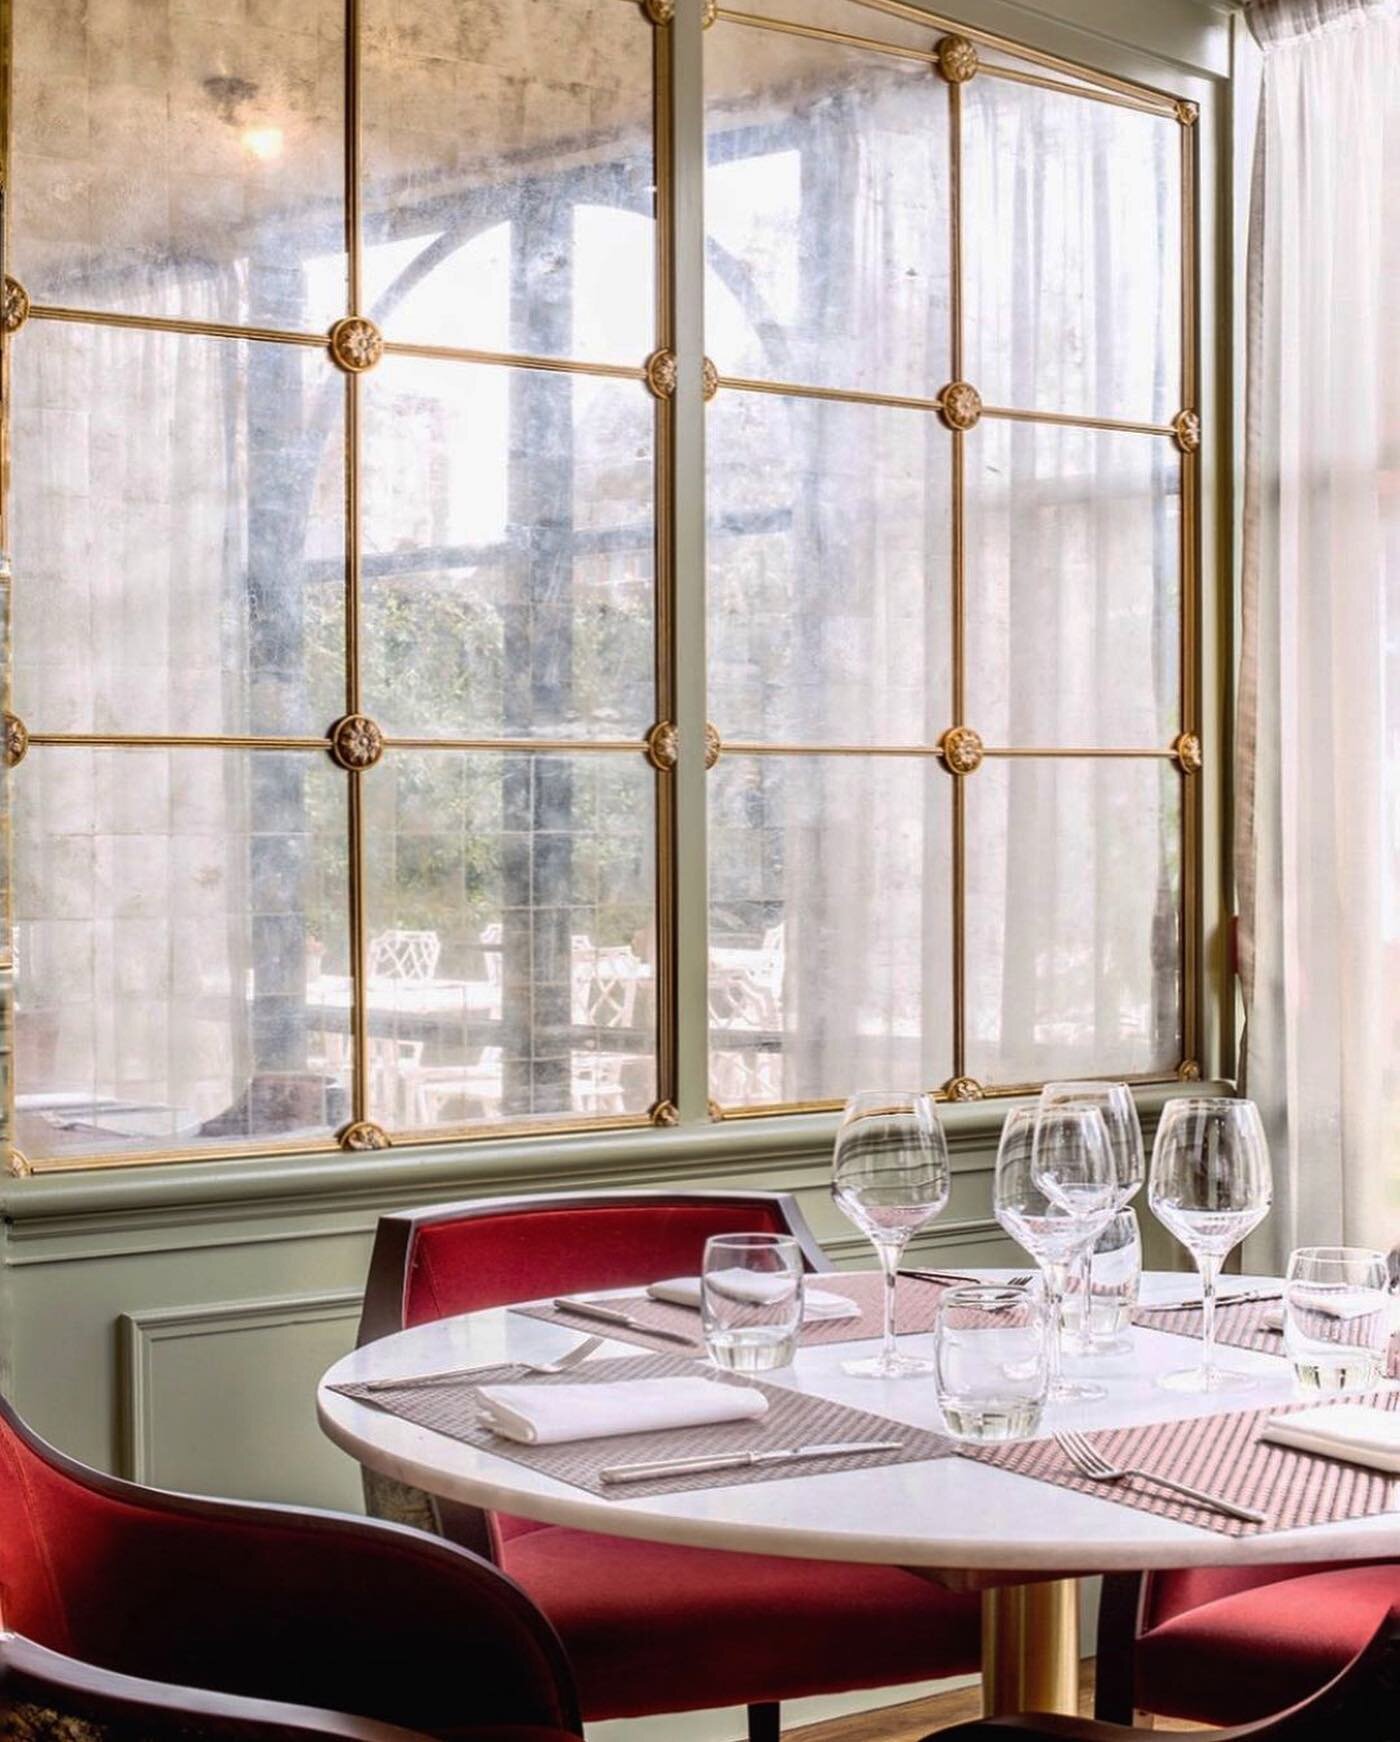 That Friday feeling&hellip; What are your plans today? We&rsquo;ll be admiring our beautiful Verre Eglomise triangular glass mirror with gold medallions while enjoying food and drinks at the @estreetbarandgrill in Petworth, West Sussex! #Projects #Ve